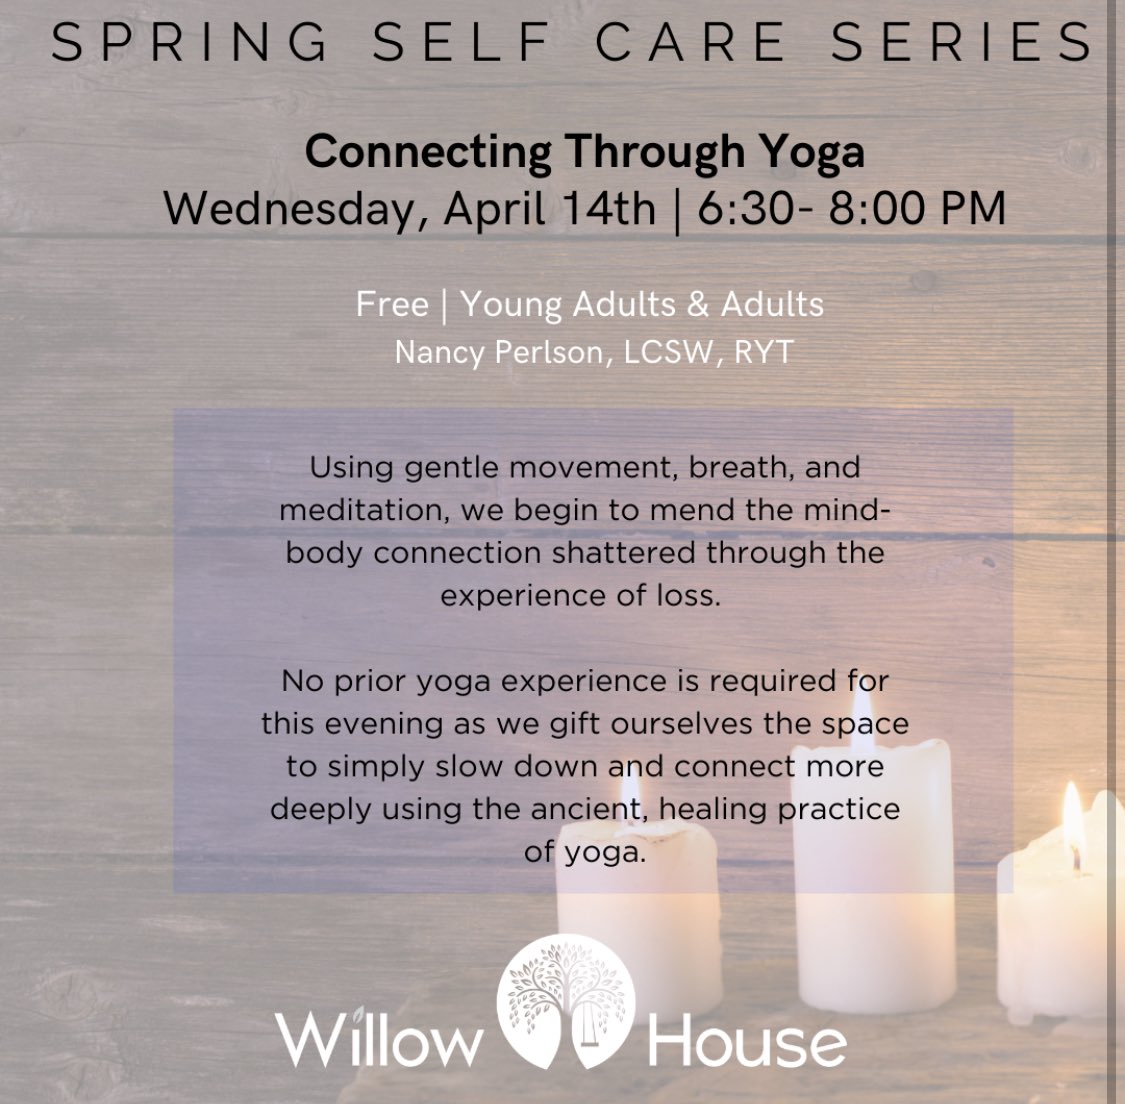 One week away! Register today: willowhouse.org/spring-self-ca… #yoga #selfcare #yogaselfcare #griefsupport #grief #yogapractice